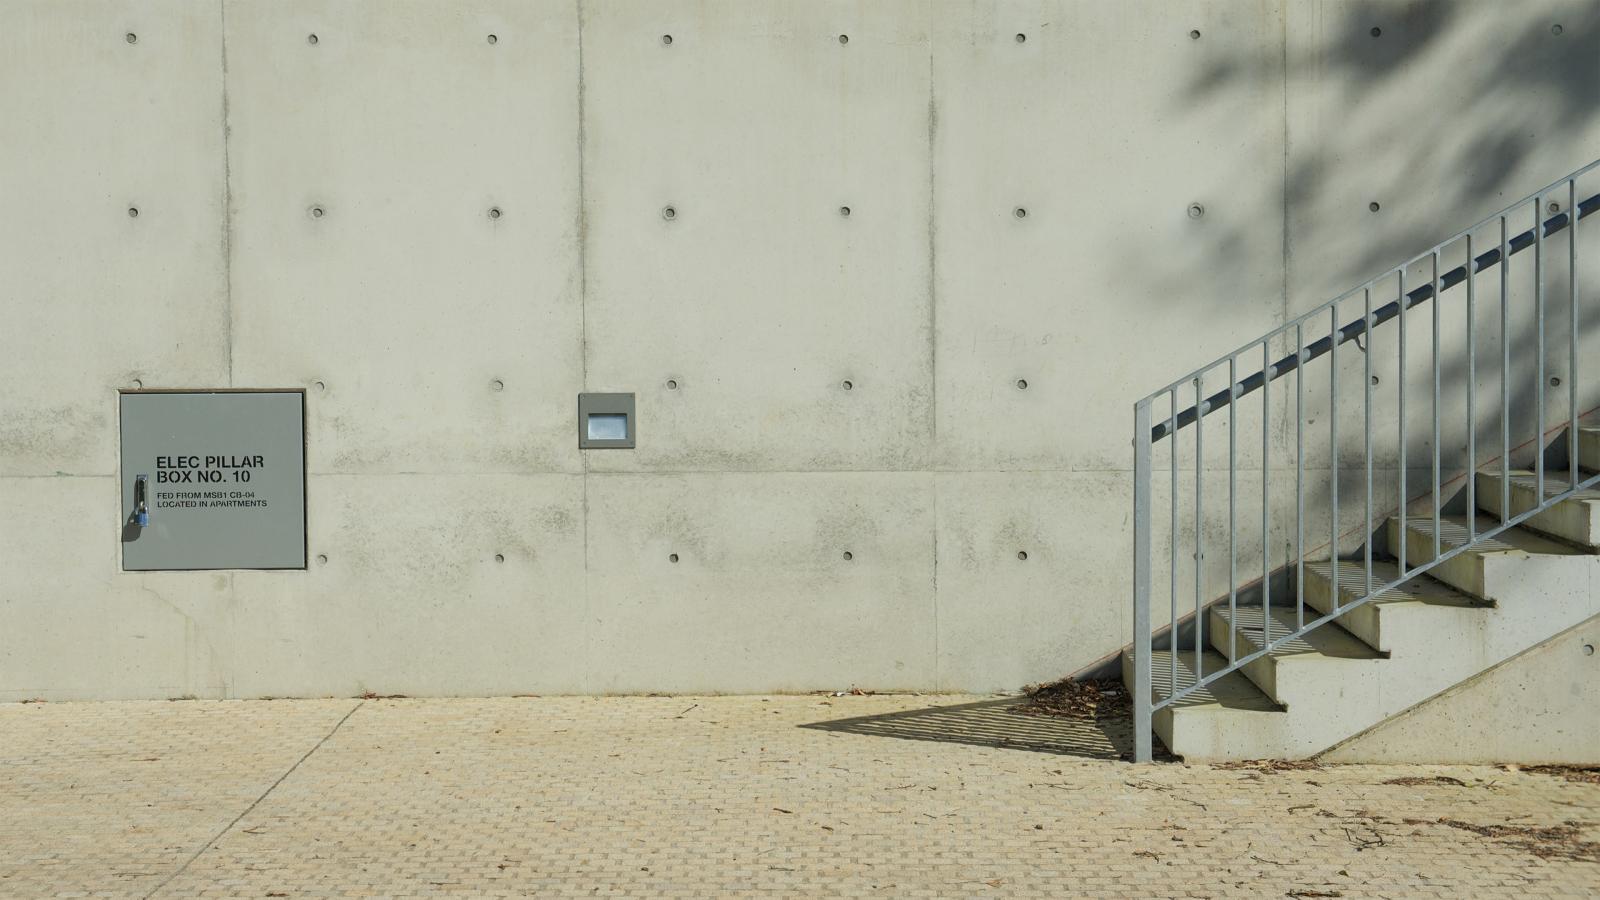 A minimalist, manly outdoor scene featuring a concrete wall with a small door labeled "ELEC PILAR (BLOCK NO. 10)" and an electrical warning. Beside it, a small light fixture and a metal staircase casting a shadow on the ground. The area, reminiscent of Spring Cove, is paved with light-colored tiles.